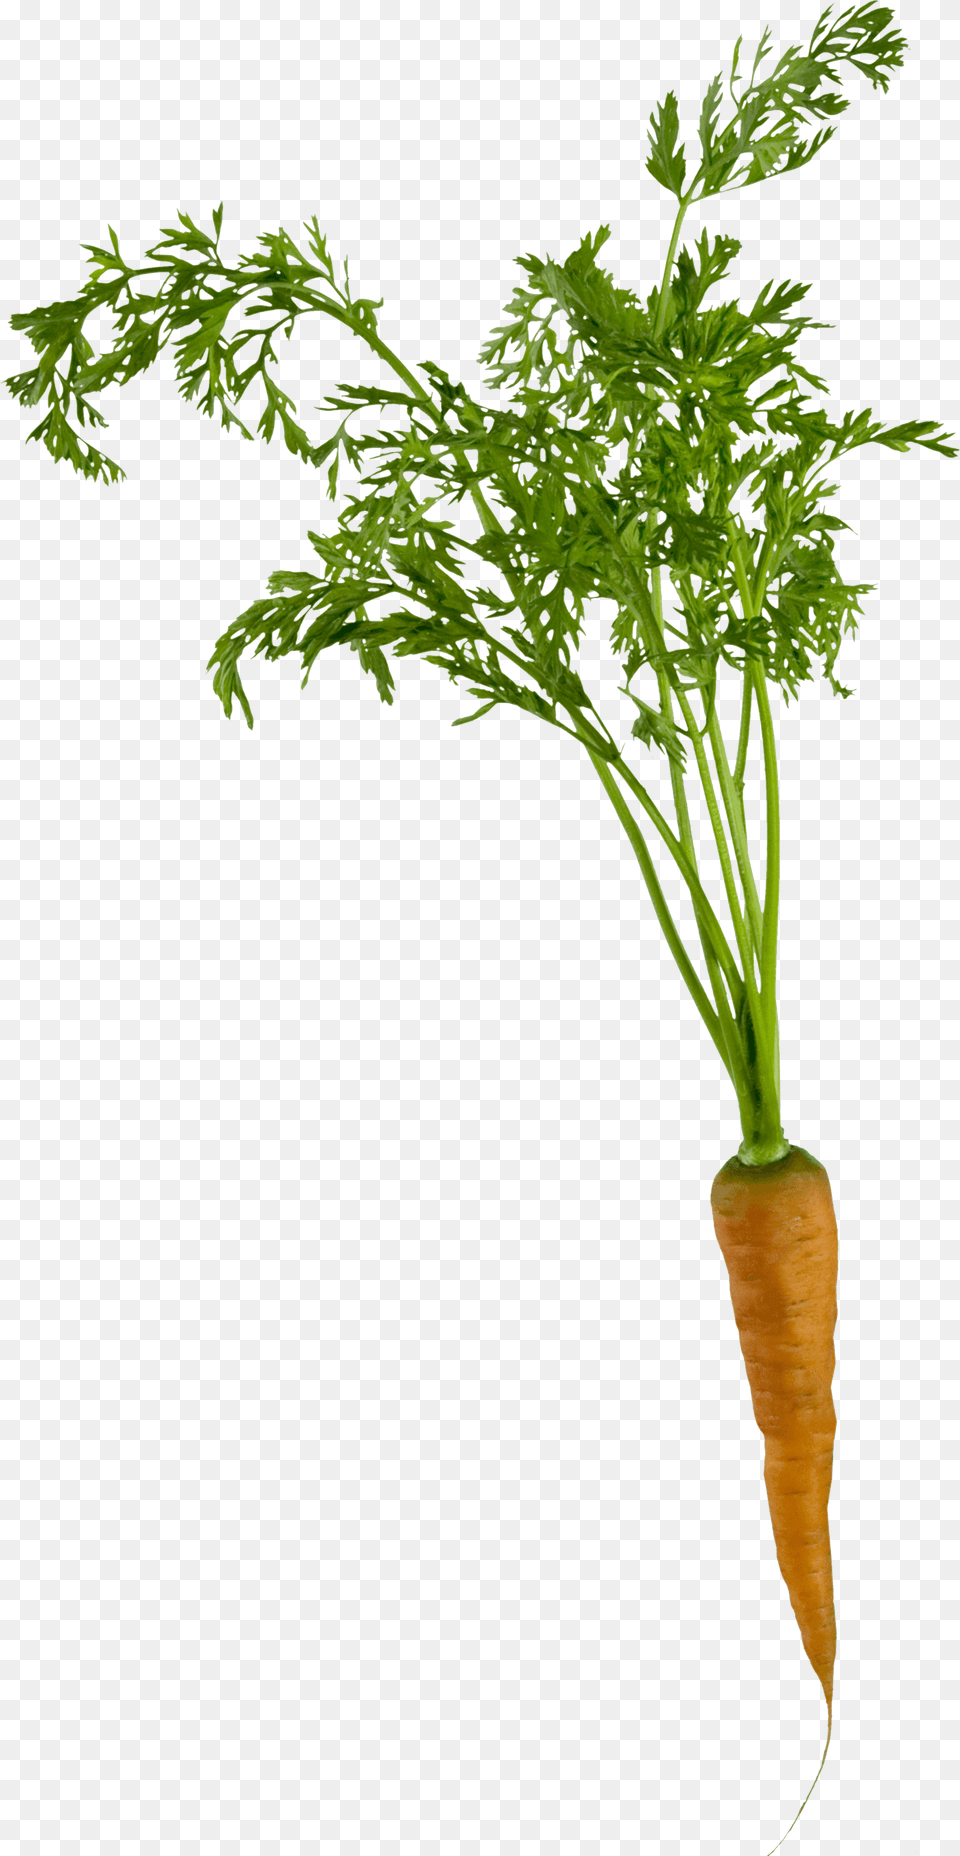 Single Carrot, Food, Plant, Produce, Vegetable Png